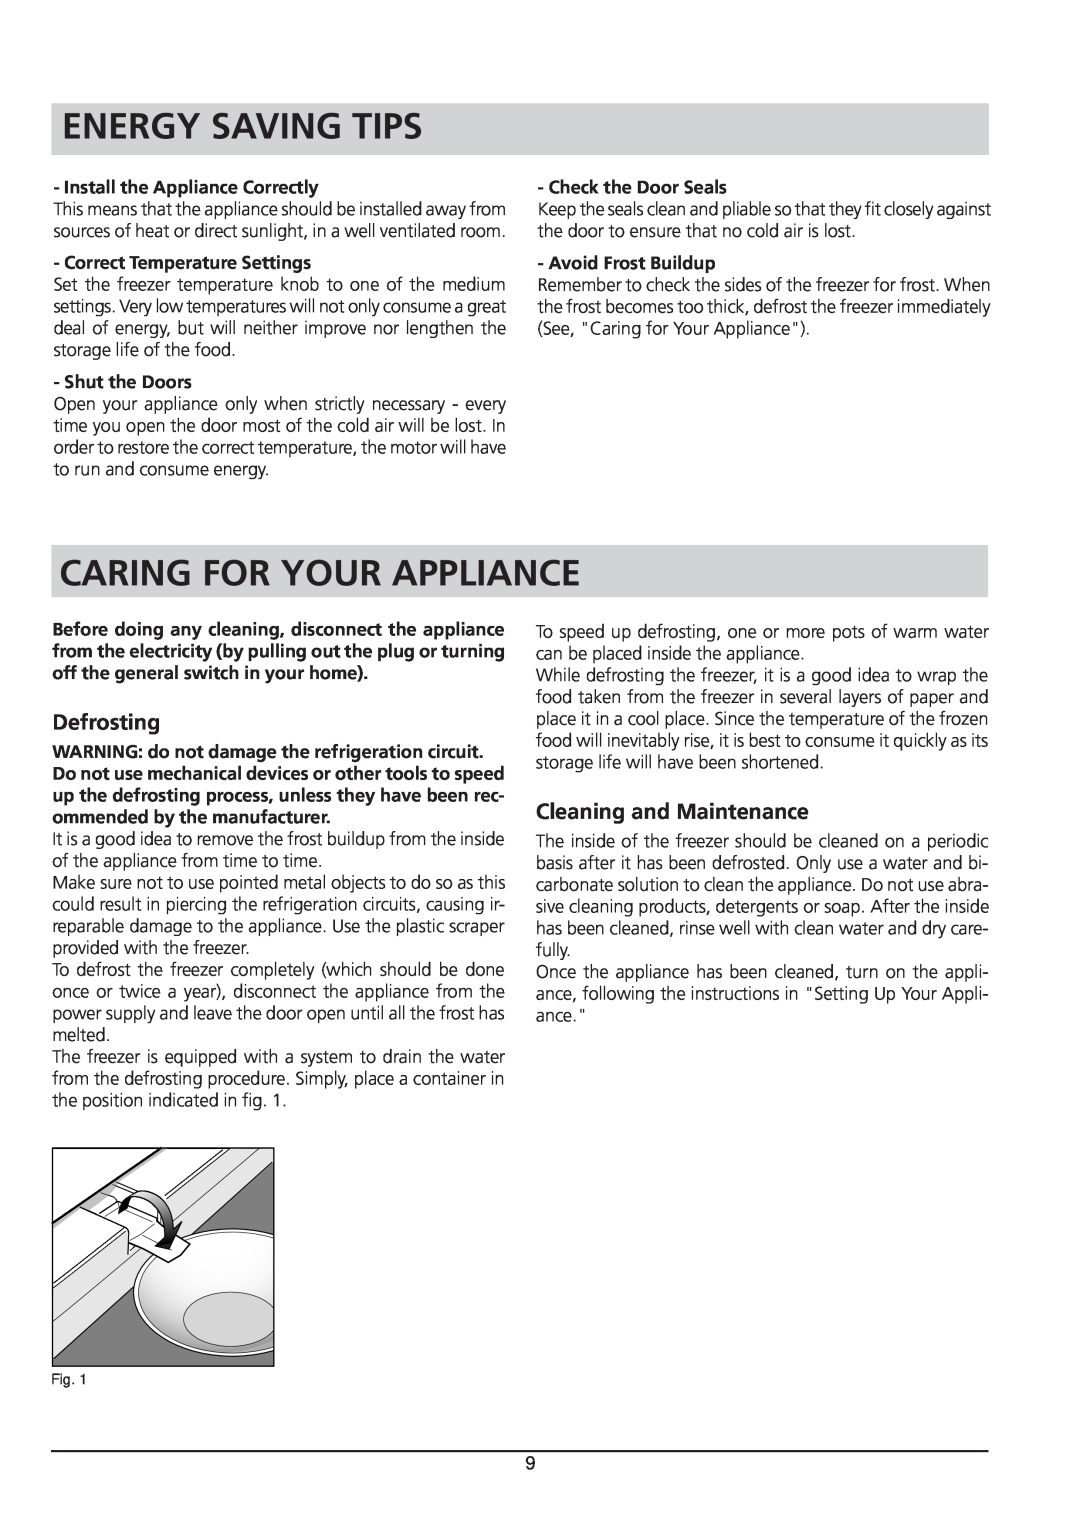 Hotpoint RZA 21 manual Energy Saving Tips, Caring For Your Appliance, Defrosting, Cleaning and Maintenance, Shut the Doors 